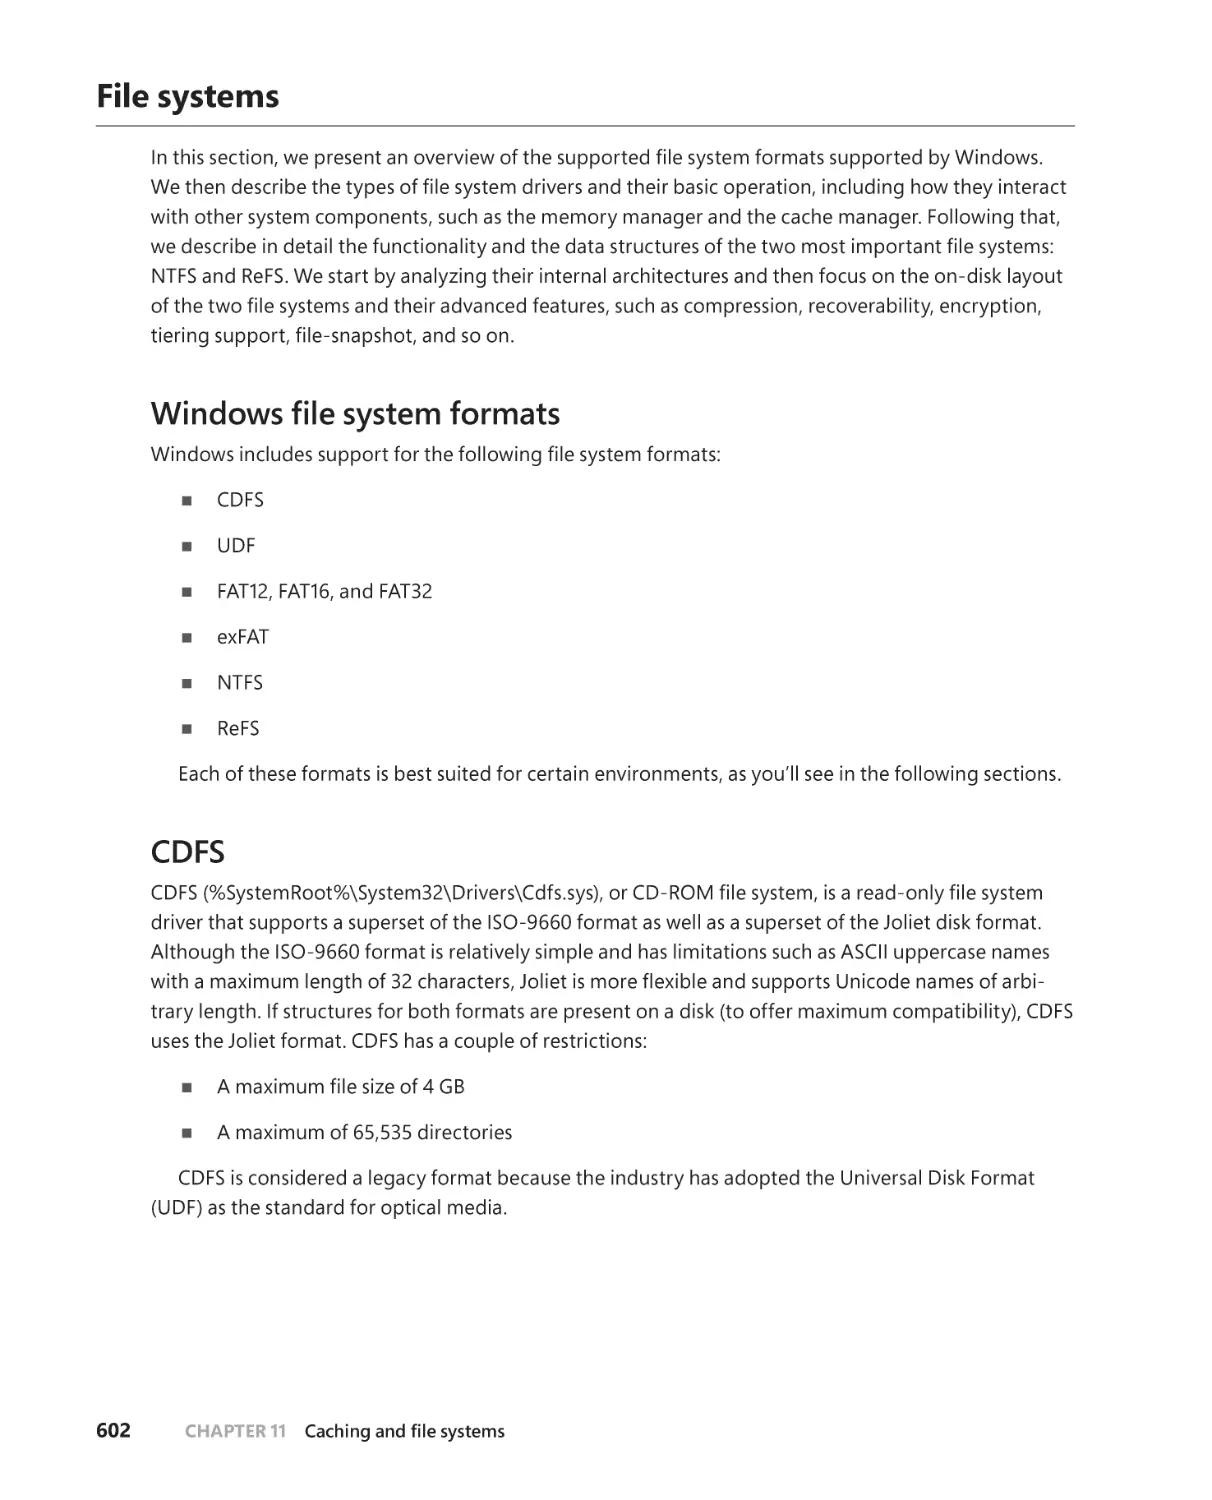 File systems
Windows file system formats
CDFS